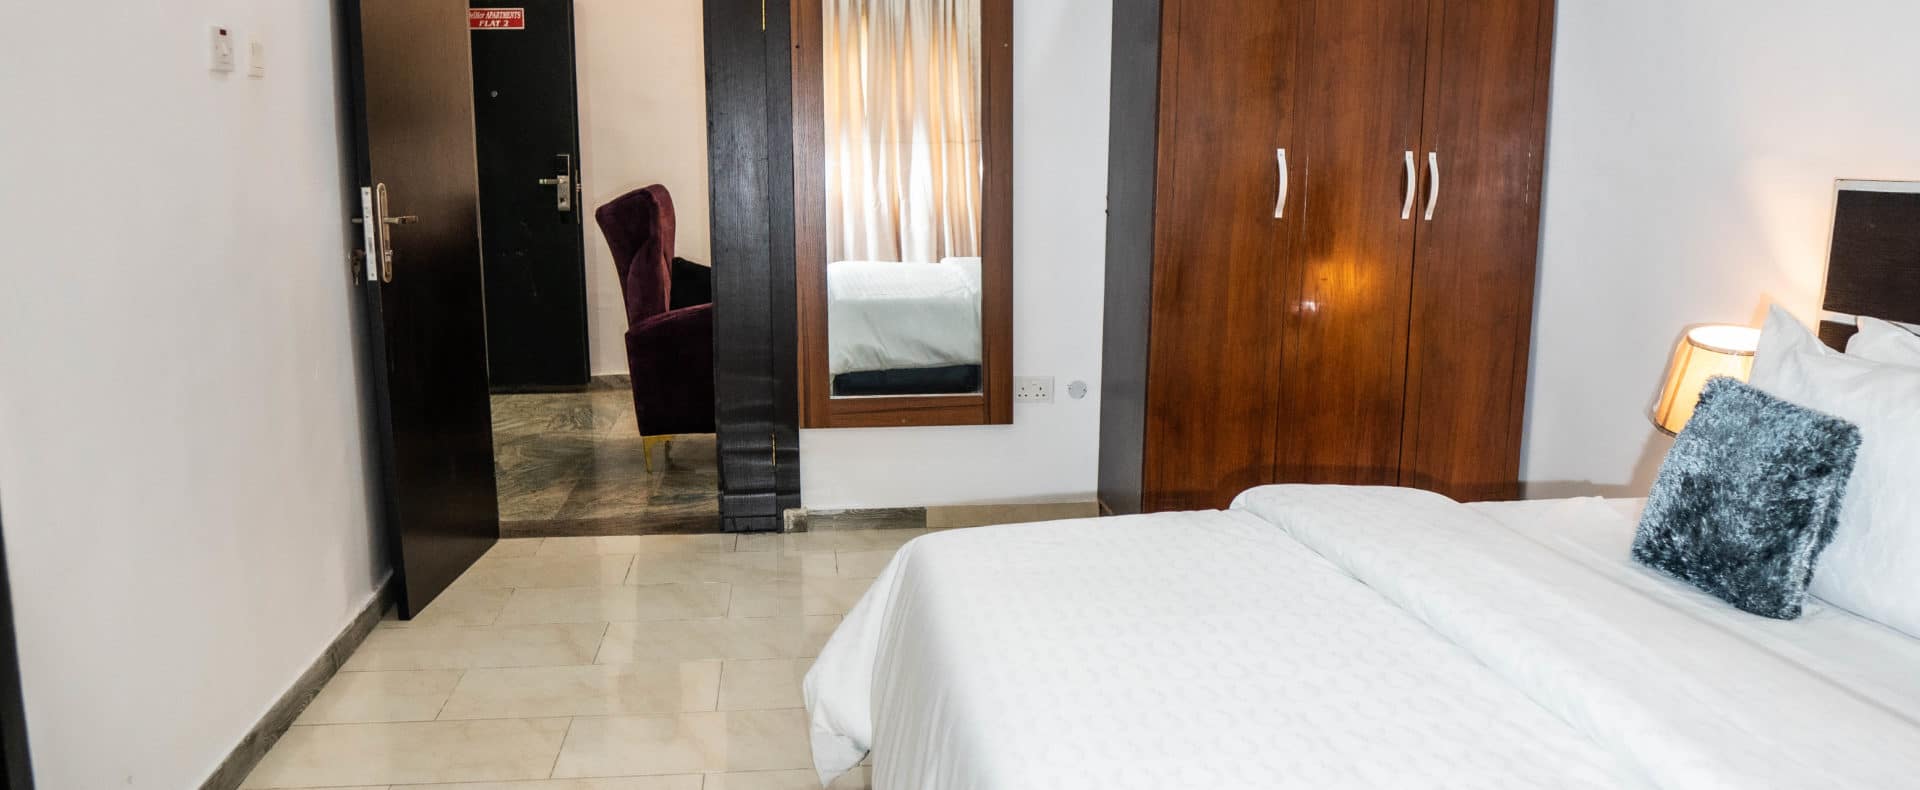 1 Bedroom Delmor Shortlet Apartments For Hosting On Your Site In Lagos Nigeria